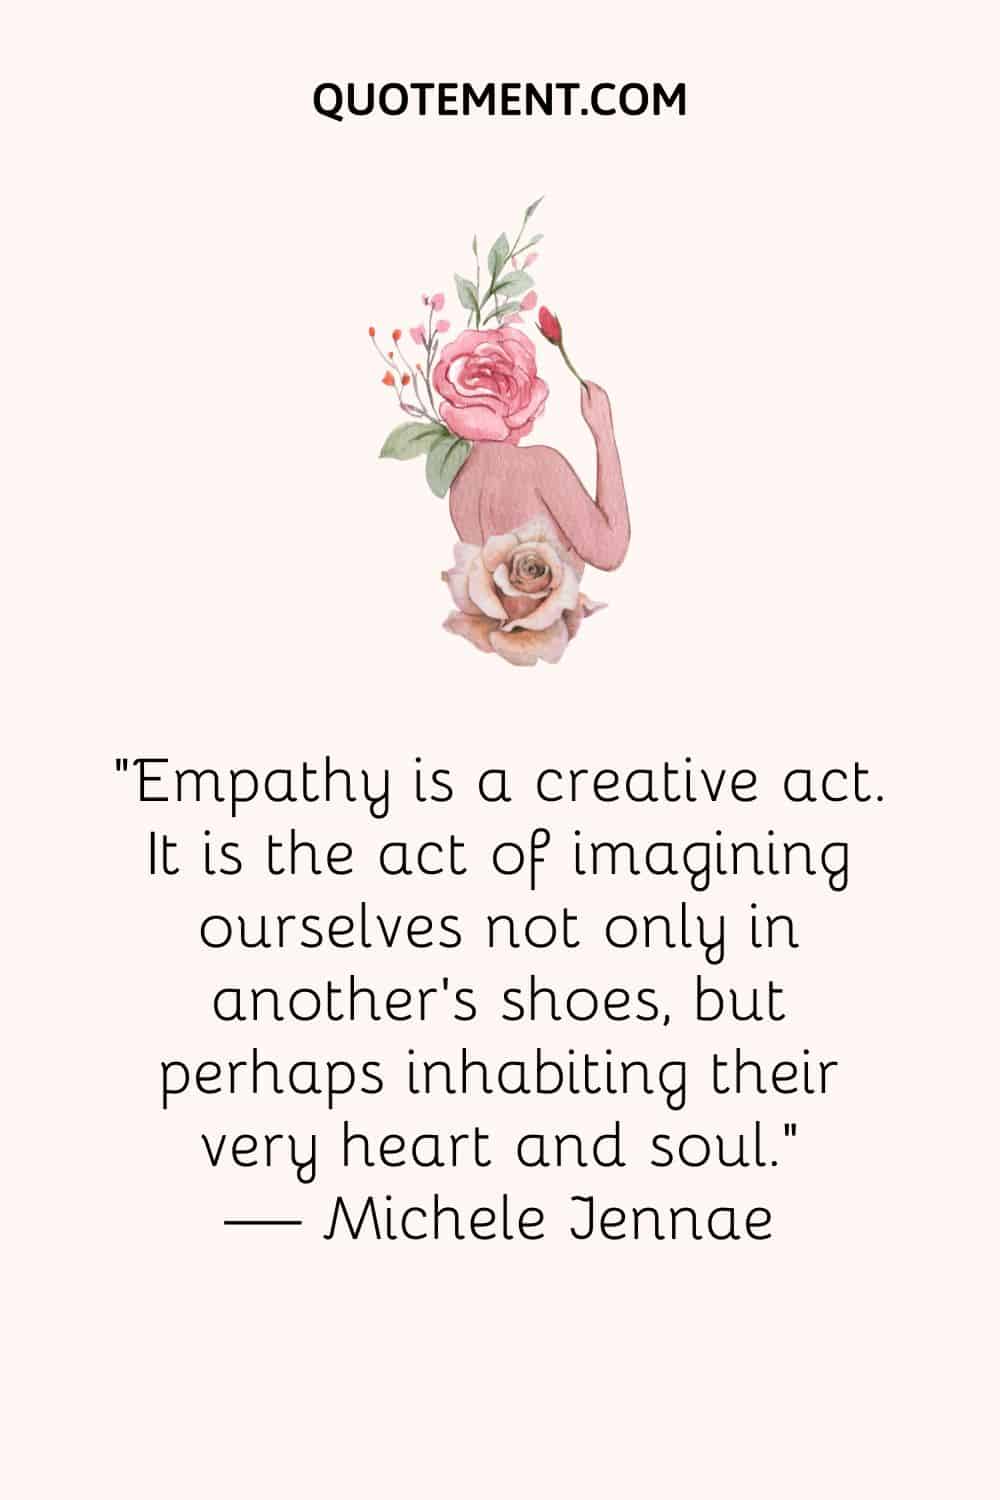 Empathy is a creative act. It is the act of imagining ourselves not only in another’s shoes, but perhaps inhabiting their very heart and soul.